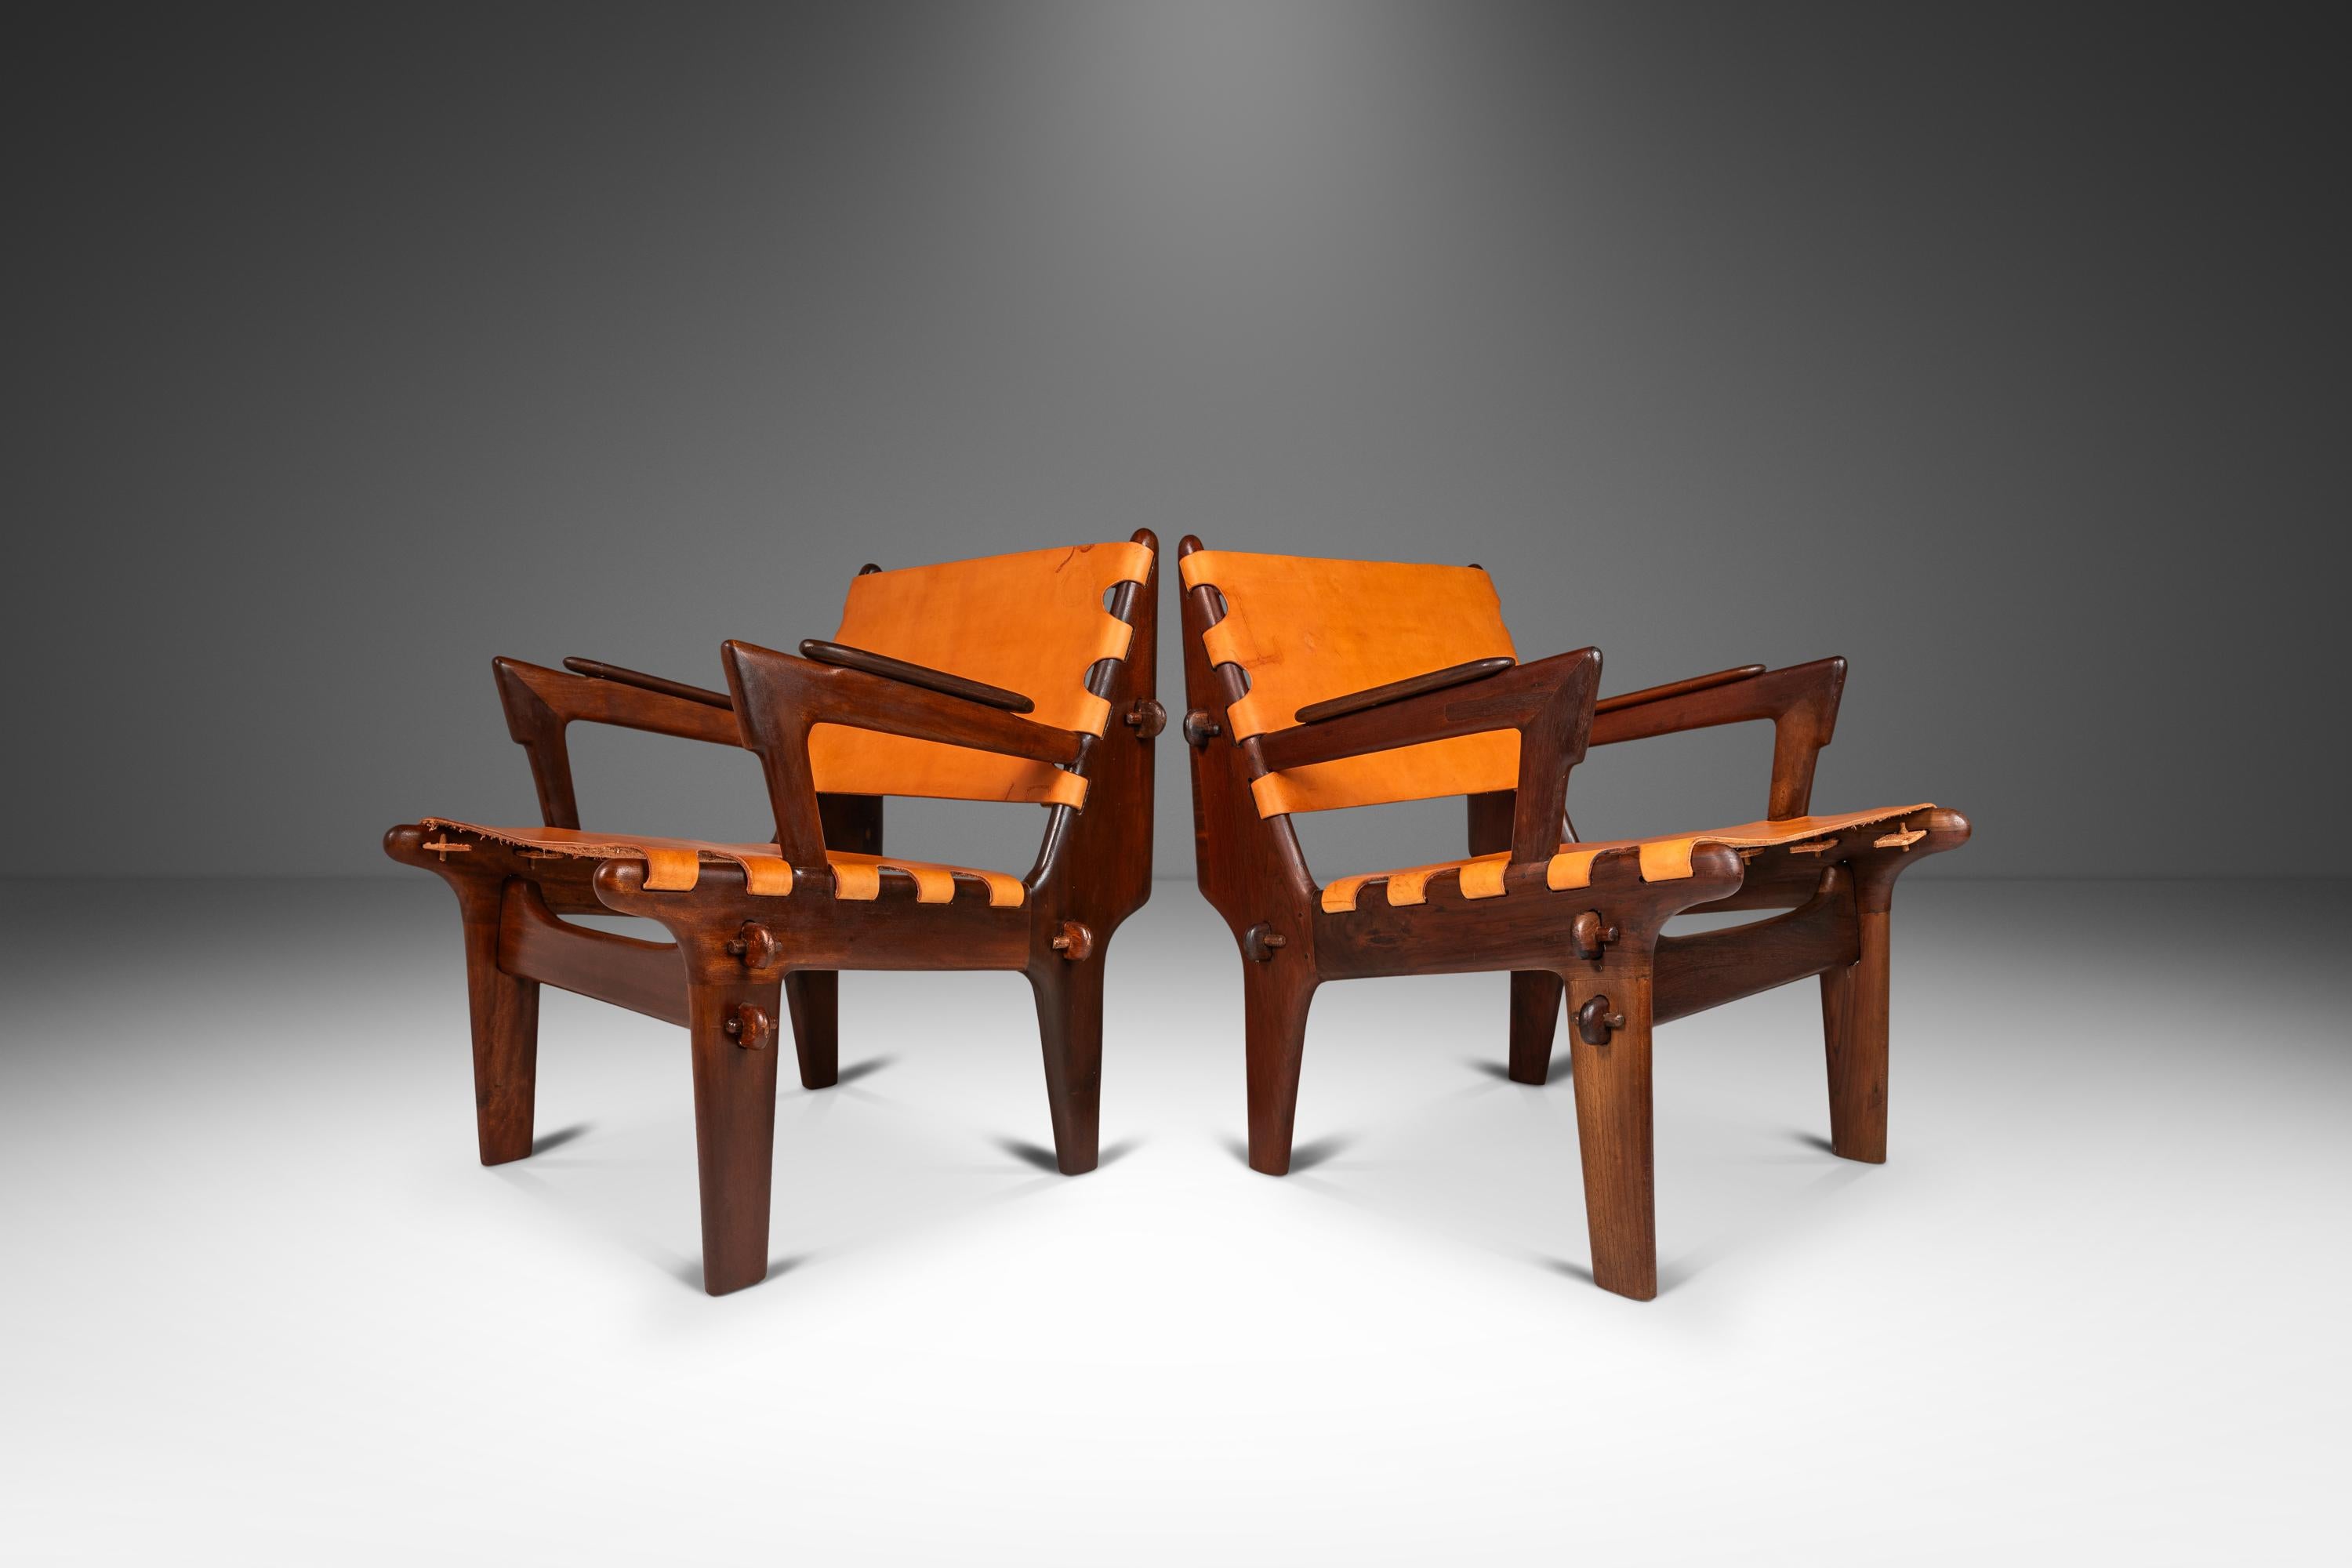 Ecuadorean Set of 2 Tooled Leather Sling Lounge Chairs by Angel Pazmino, Ecuador, c. 1960's For Sale